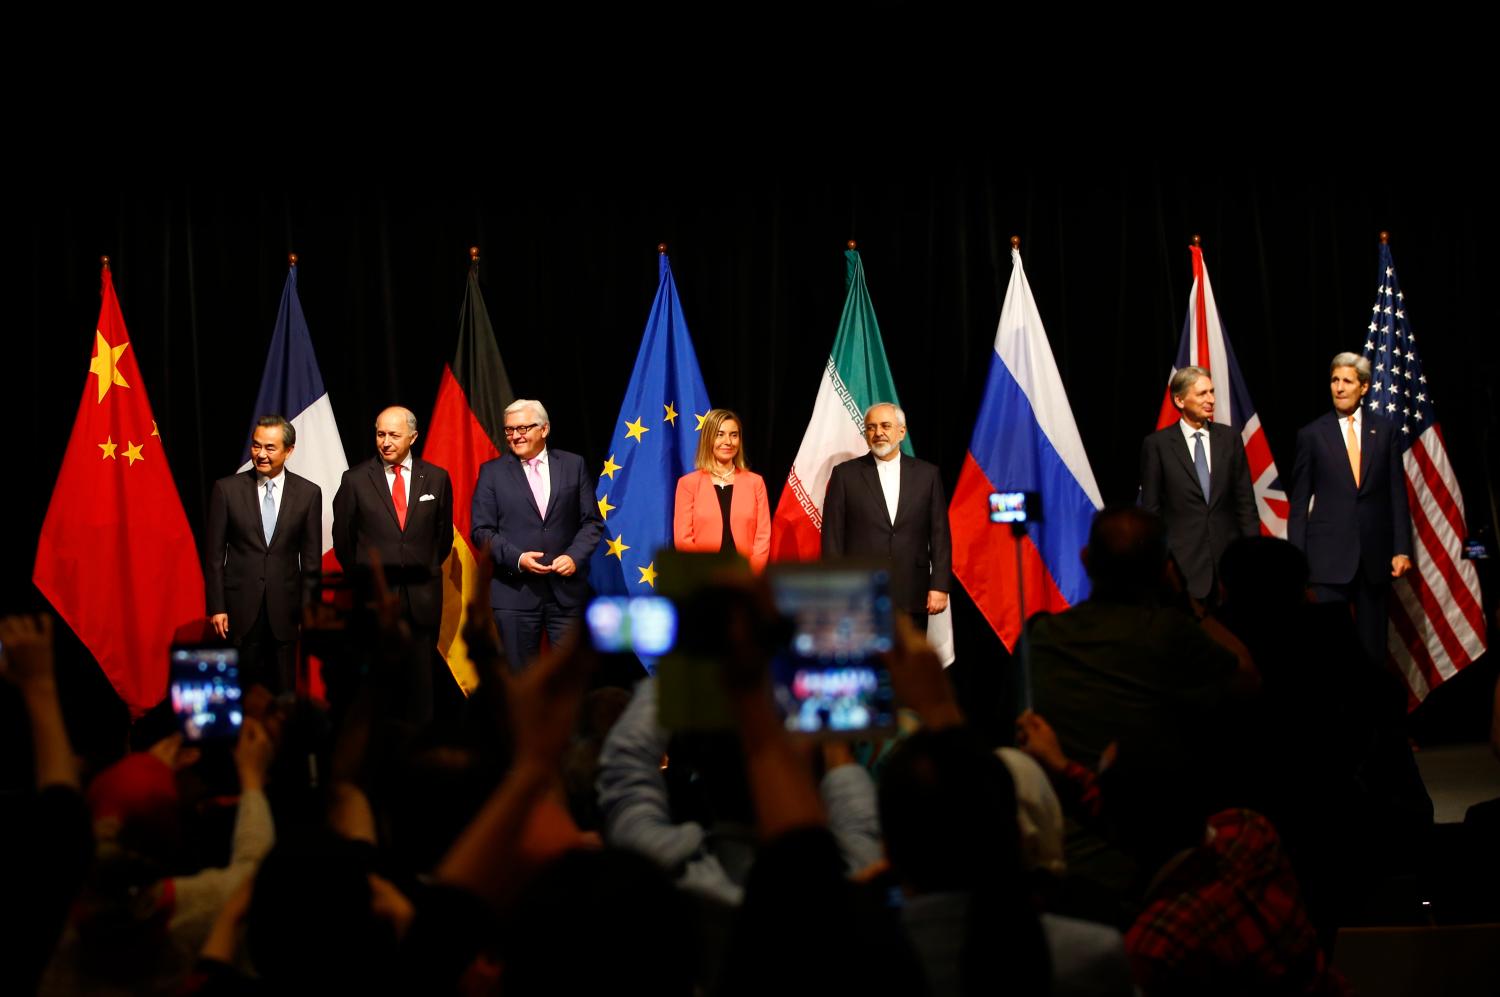 Chinese Foreign Minister Wang Yi, French Foreign Minister Laurent Fabius, German Foreign Minister Frank Walter Steinmeier, High Representative of the European Union for Foreign Affairs and Security Policy Federica Mogherini, Iranian Foreign Minister Mohammad Javad Zarif, British Foreign Secretary Philip Hammond and U.S. Secretary of State John Kerry (L-R) pose for a family picture after the last plenary session at the United Nations building in Vienna, Austria July 14, 2015. Iran and six major world powers reached a nuclear deal on Tuesday, capping more than a decade of on-off negotiations with an agreement that could potentially transform the Middle East, and which Israel called an "historic surrender". REUTERS/Leonhard Foeger - LR2EB7E0WT005